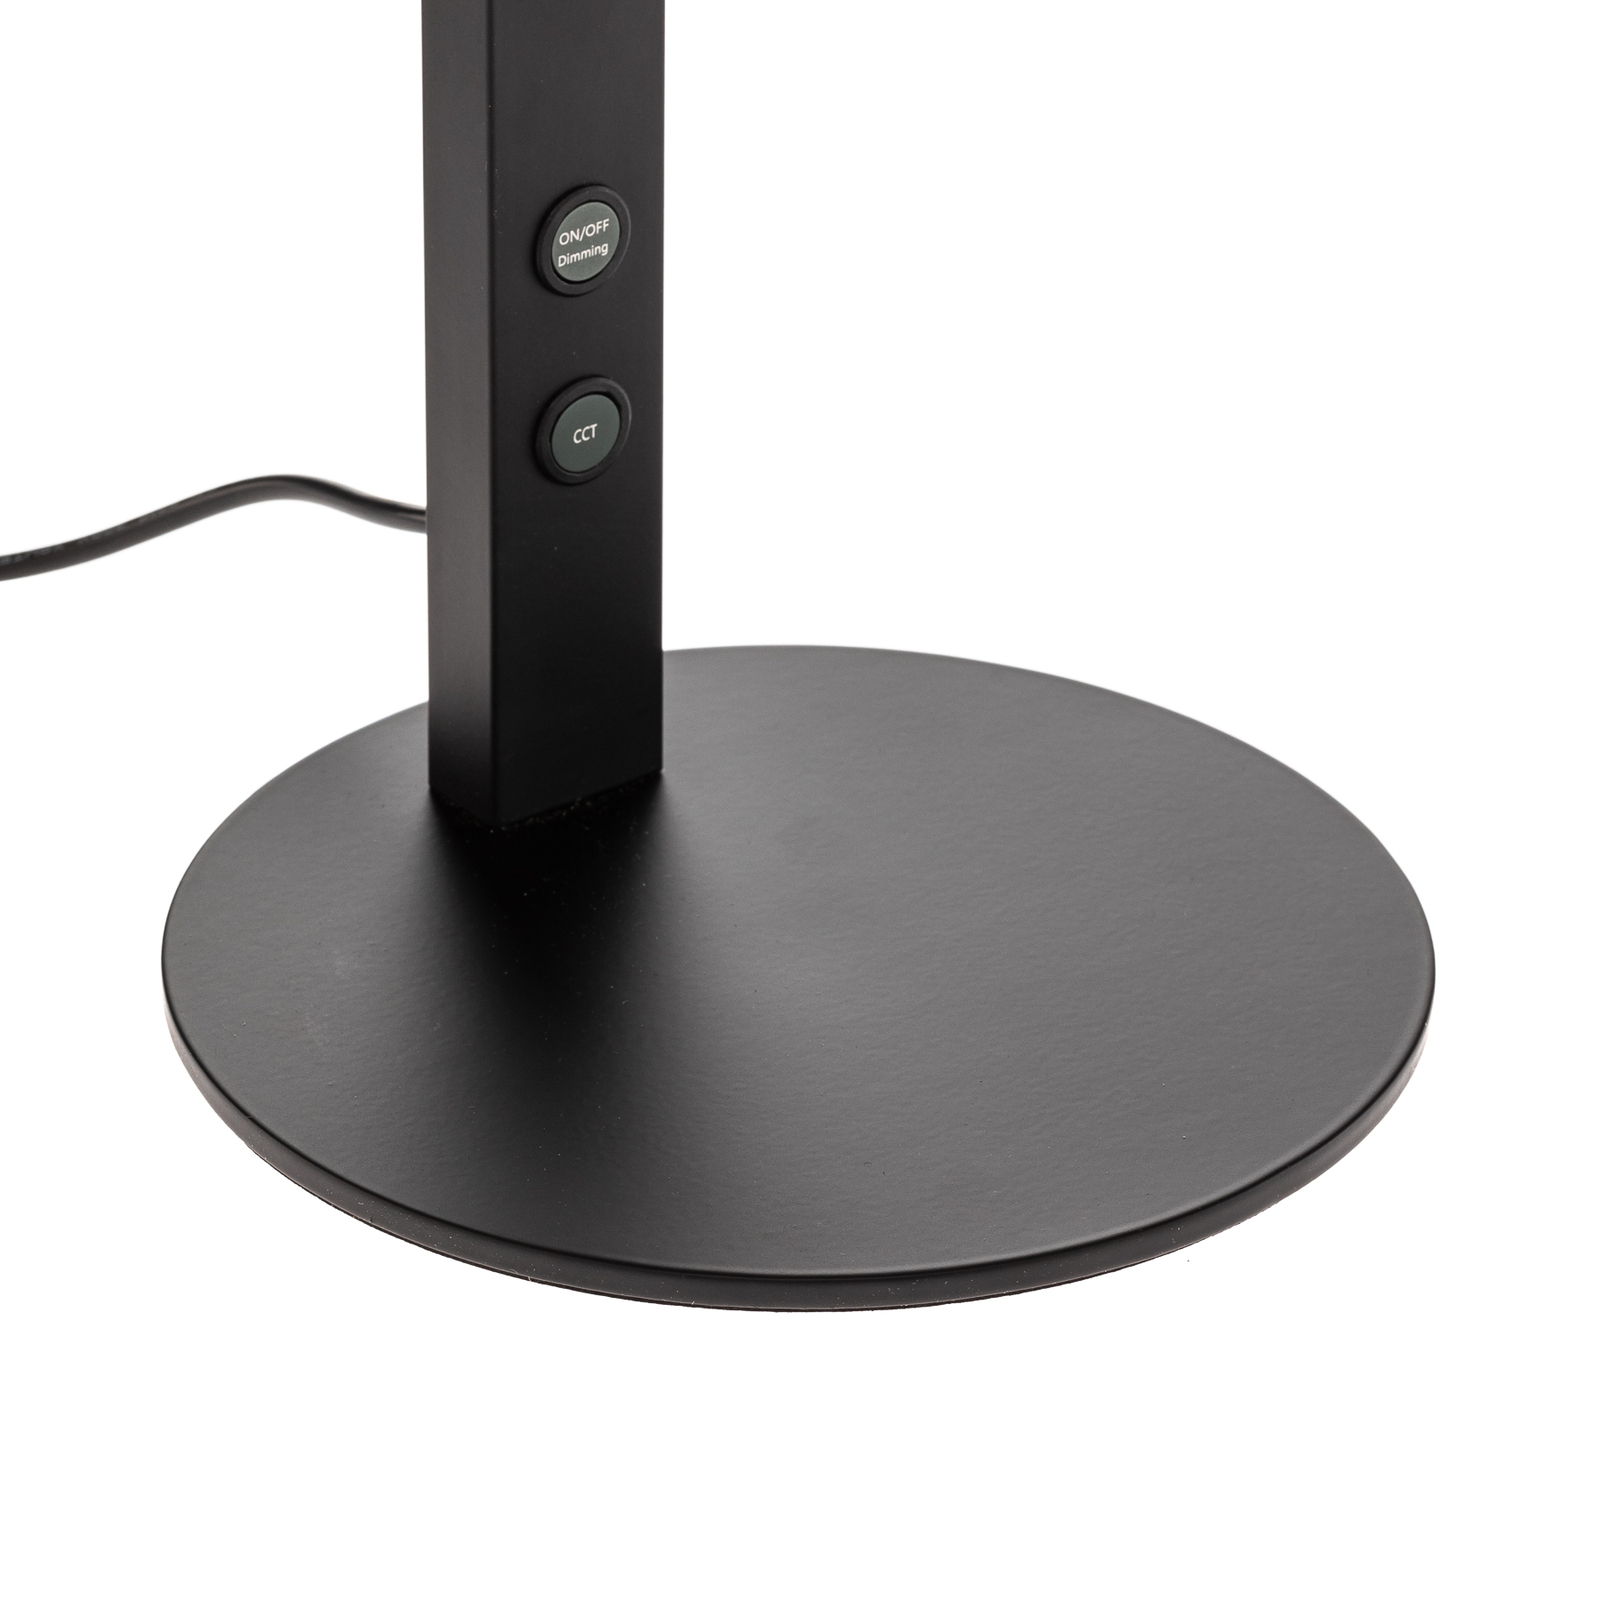 Ideal LED desk lamp with a dimmer, black